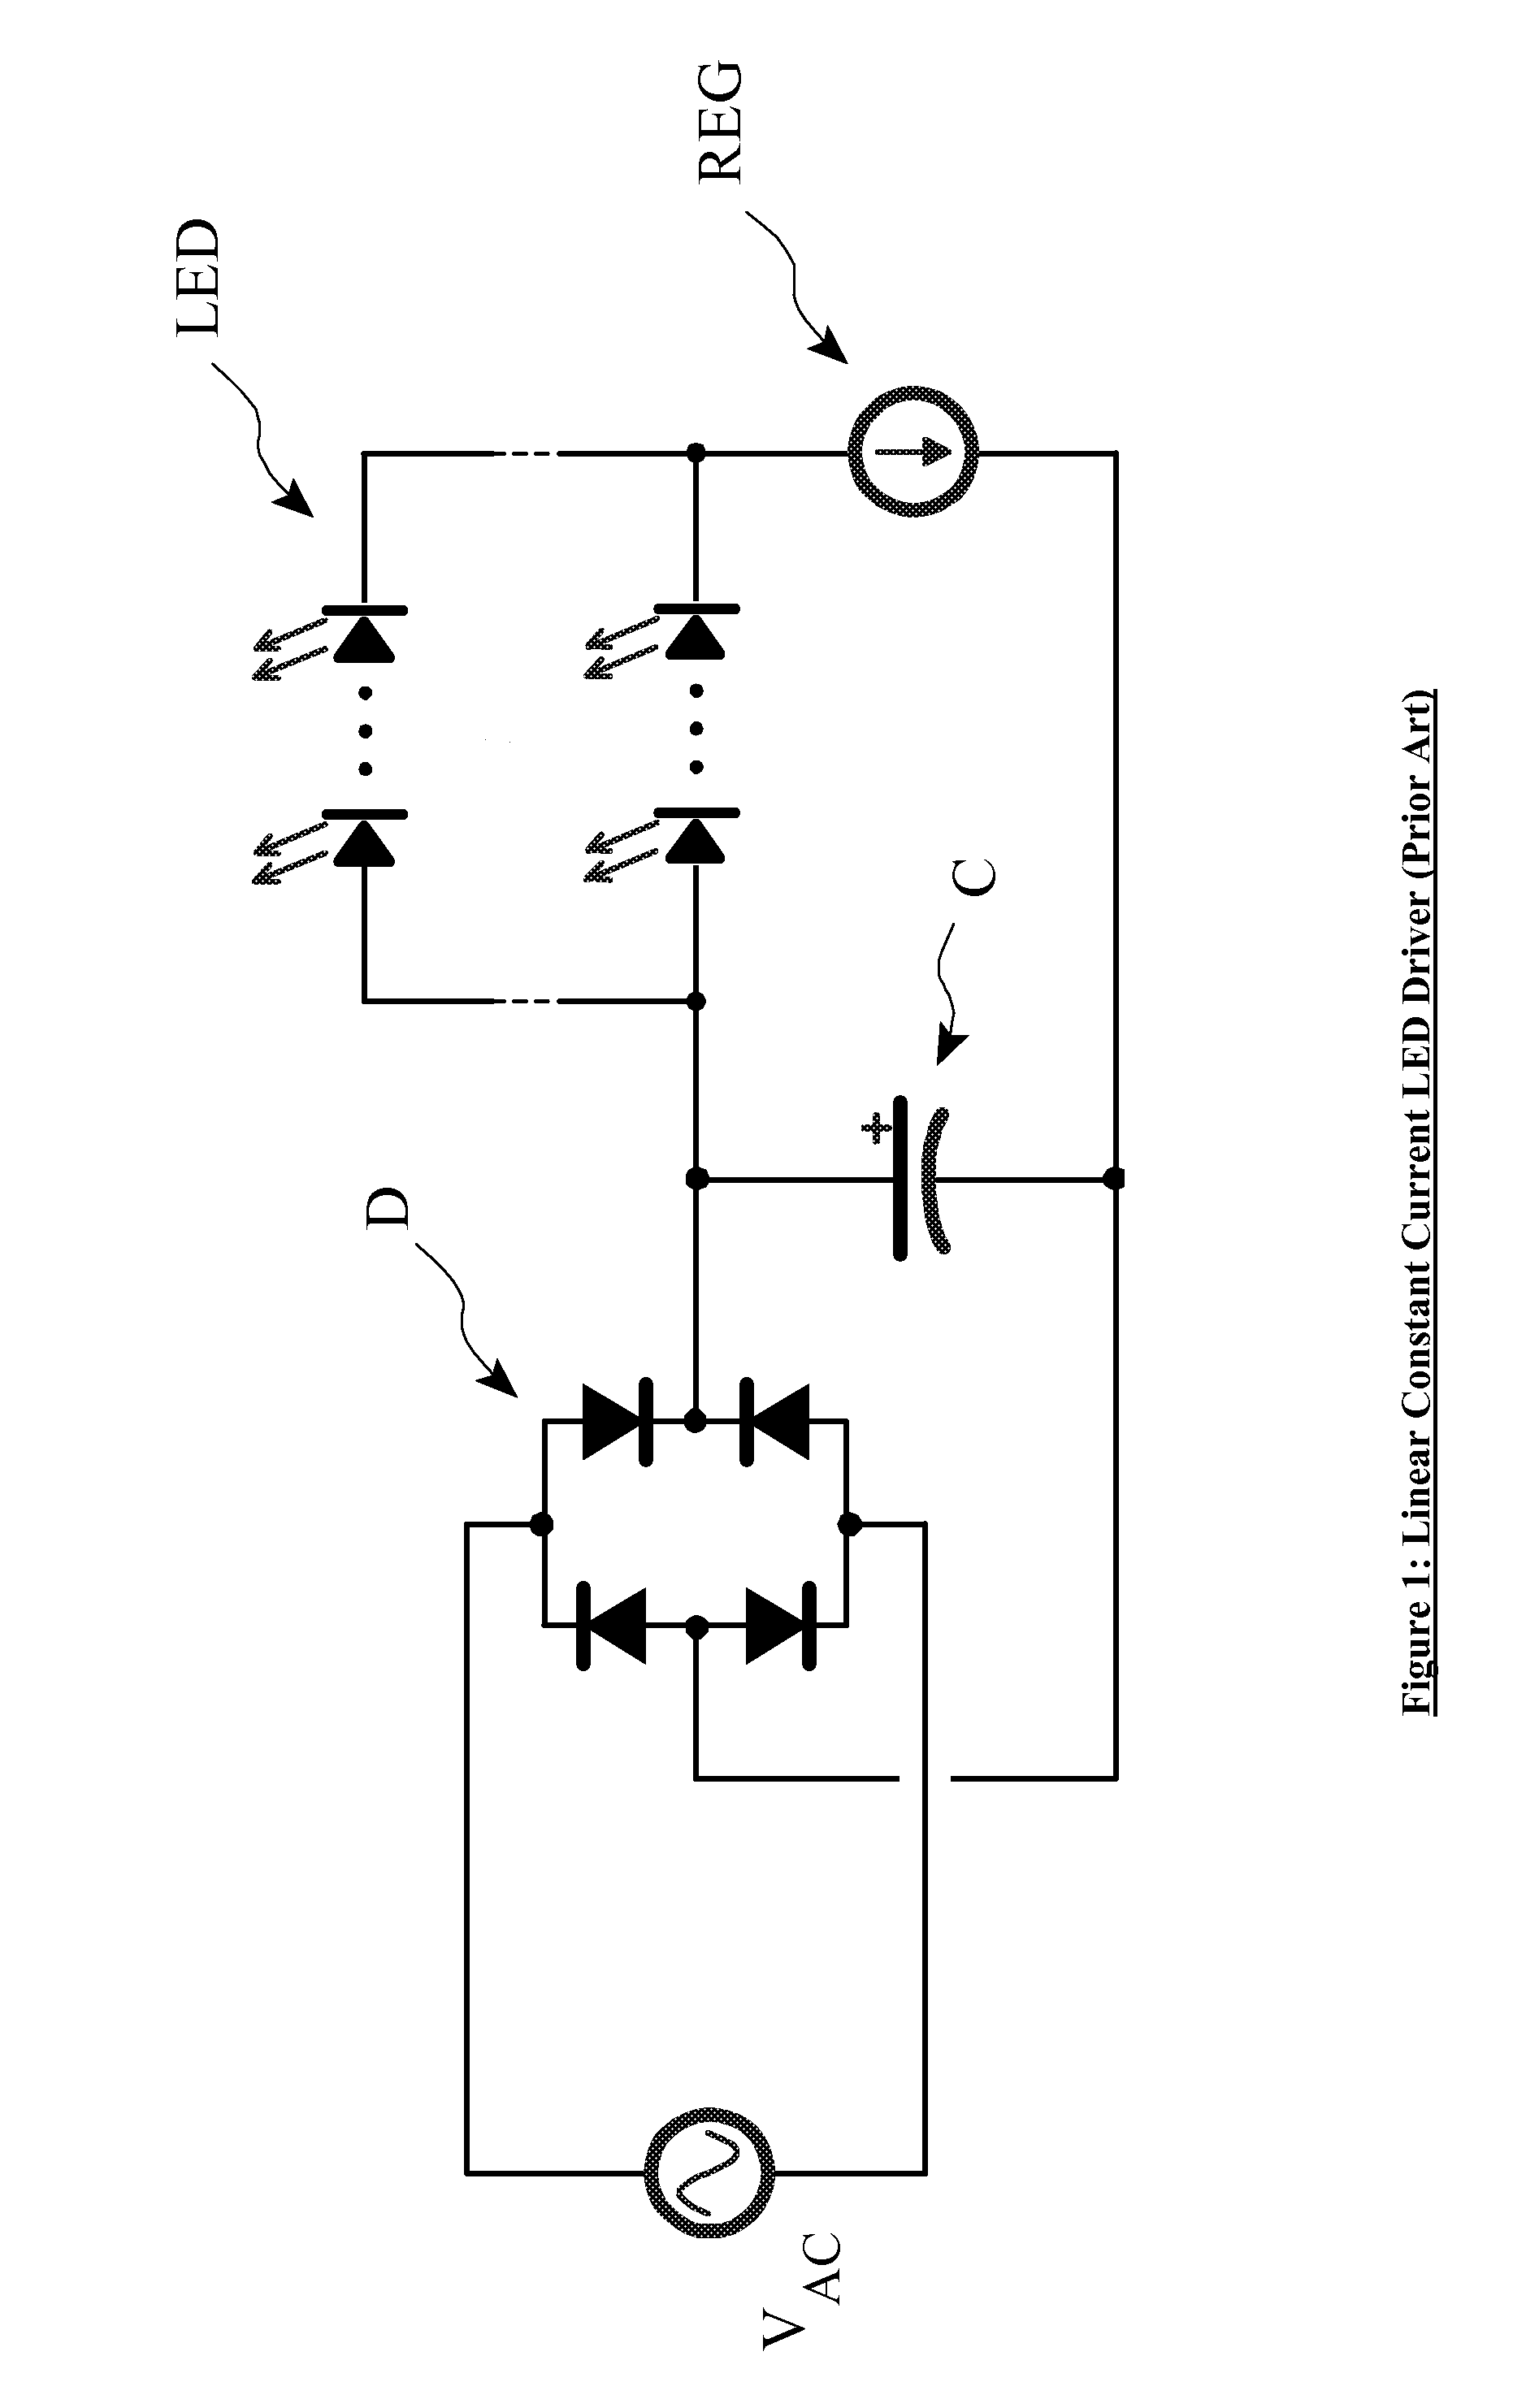 Multiple stage sequential current regulator